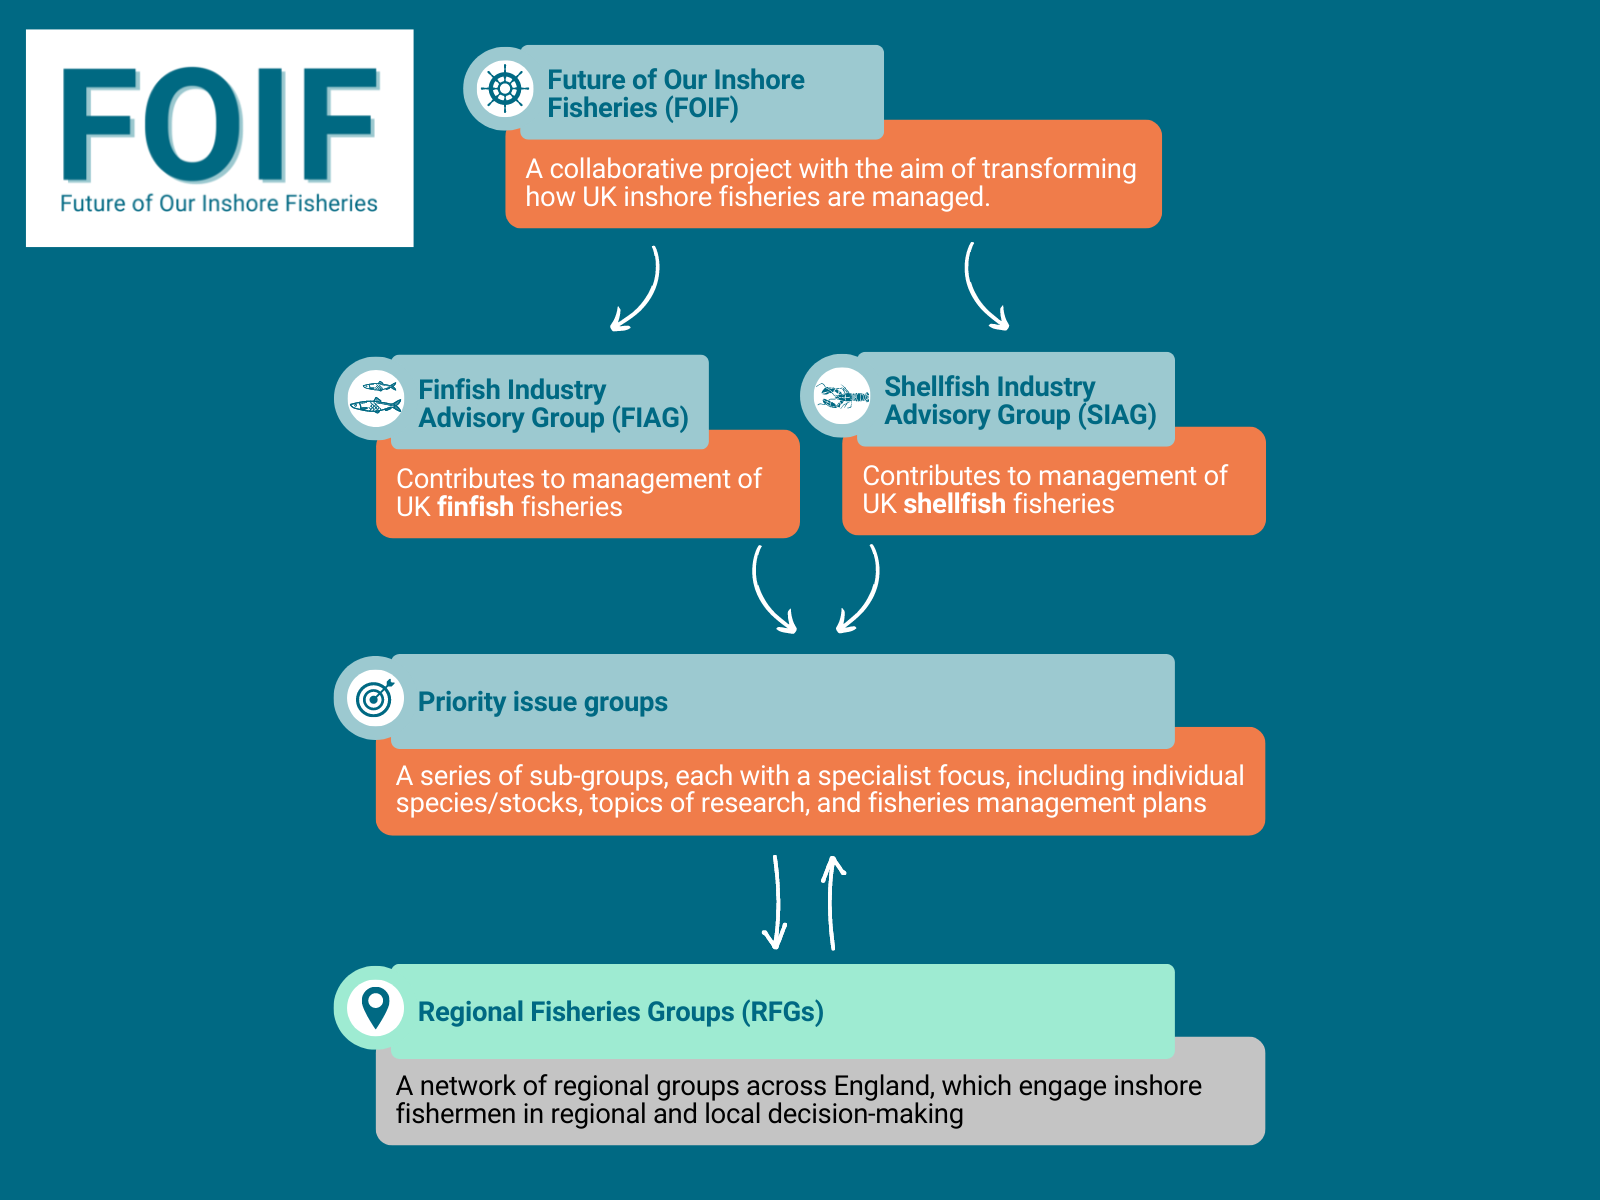 Diagram showing links between FOIF, the Finfish Advisory Group, Shellfish Advisory Group, priority issue groups and Regional Fisheries Groups